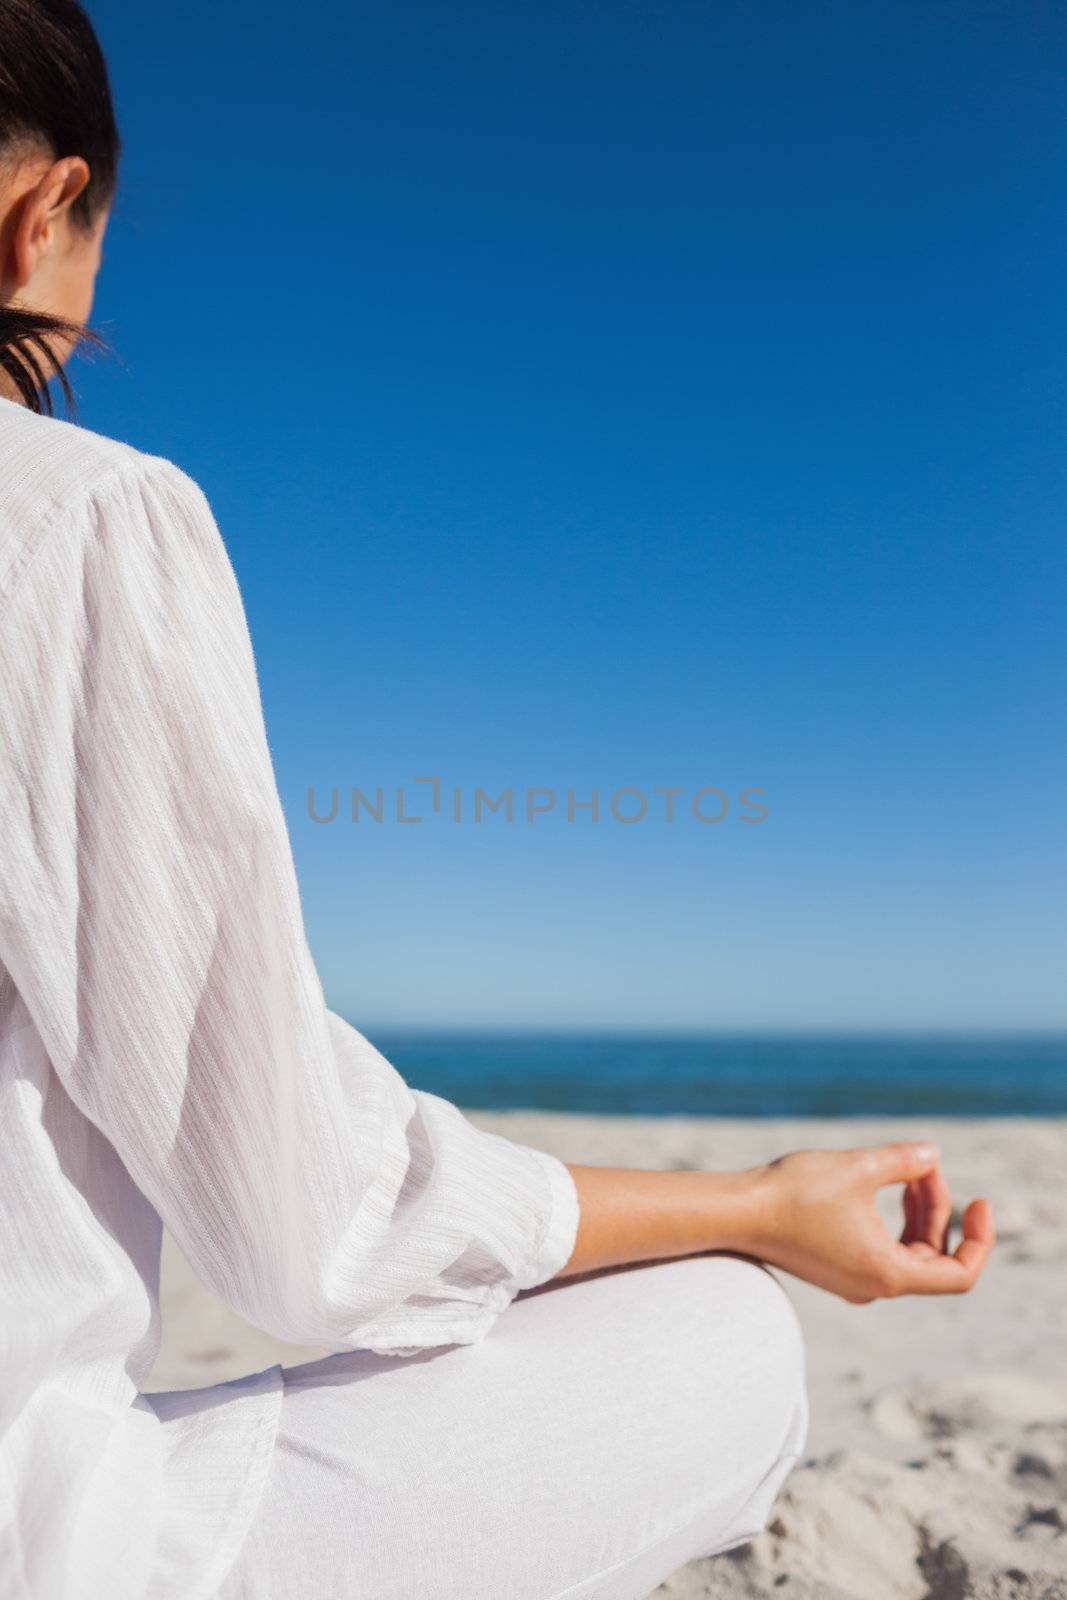 Brunette woman doing yoga at beach on a sunny day rear view